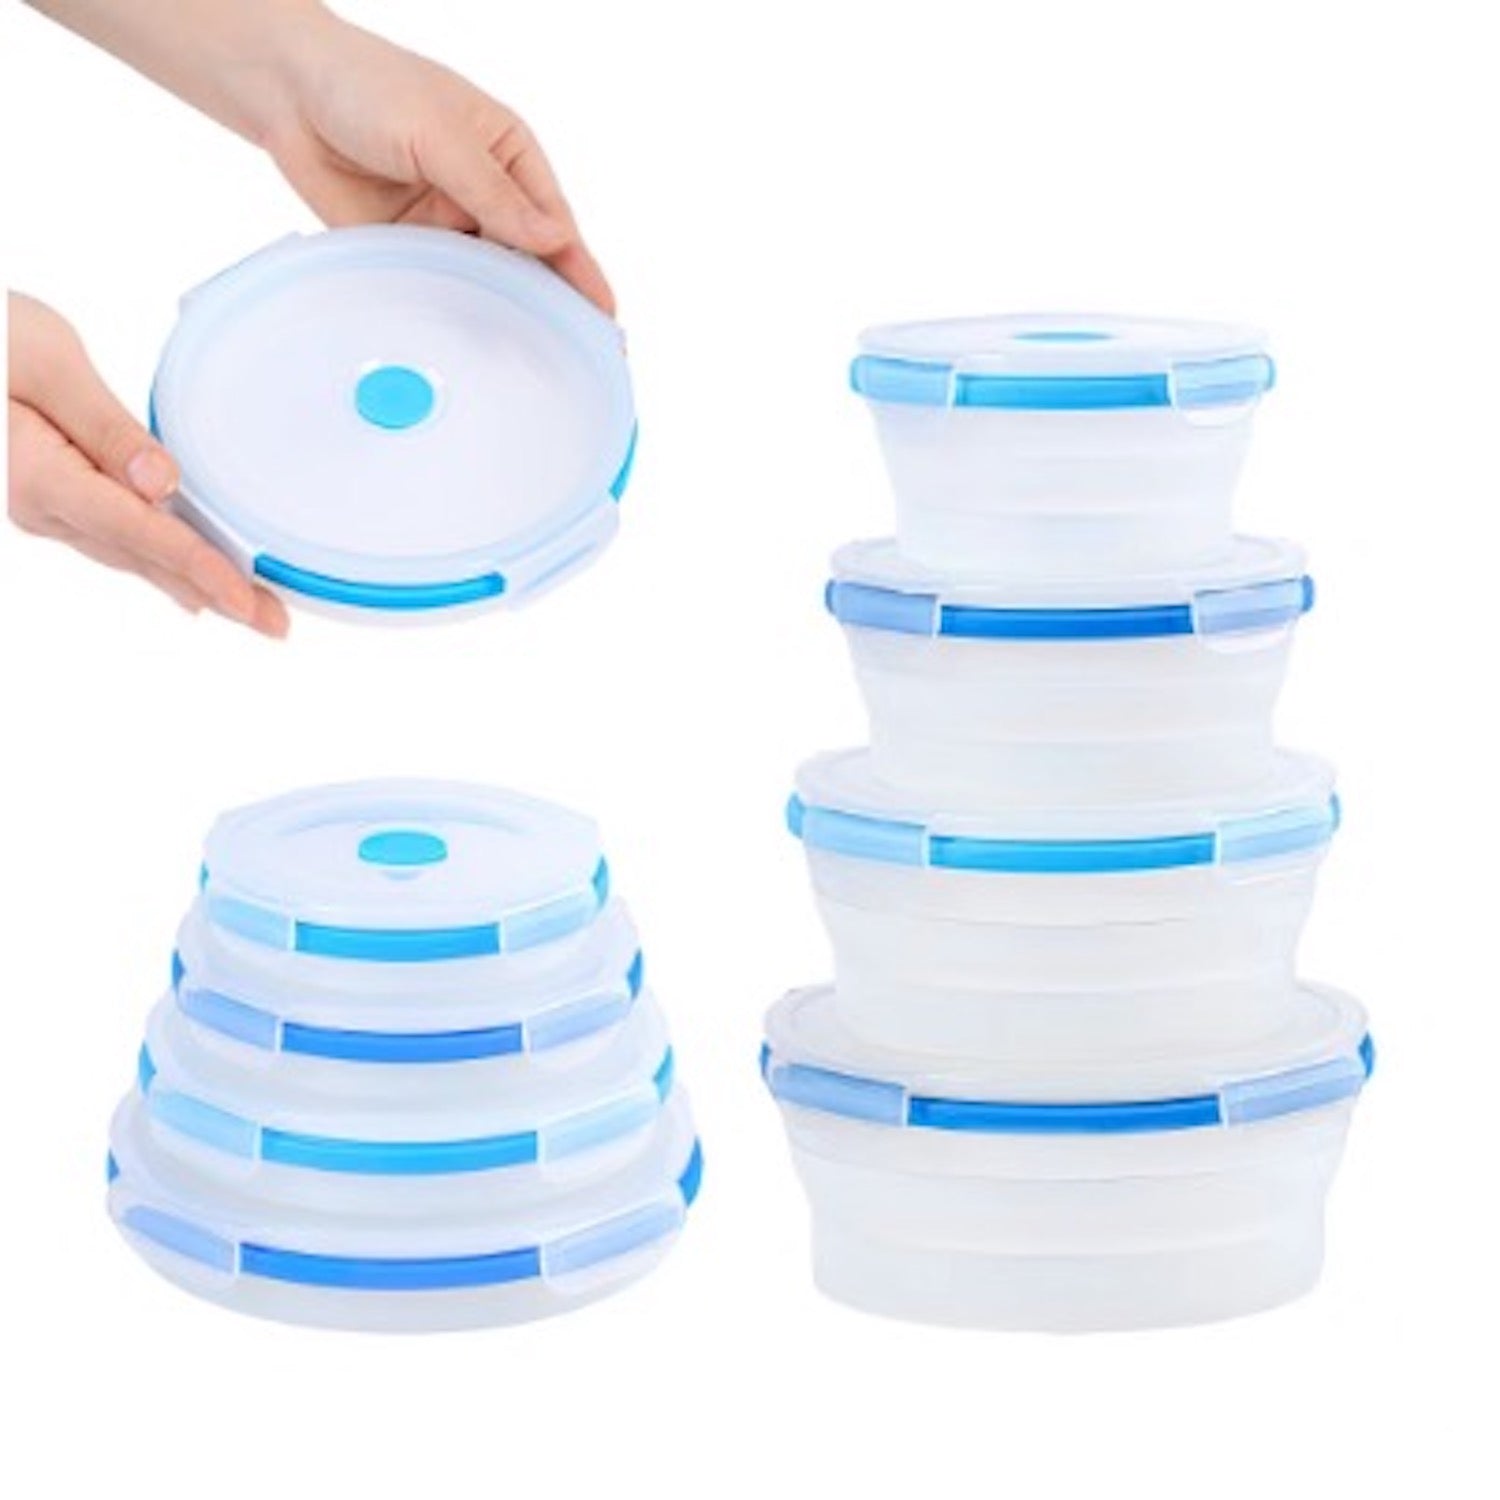 Collapsible Food Storage Containers Round Set of 4 Multi-Colored